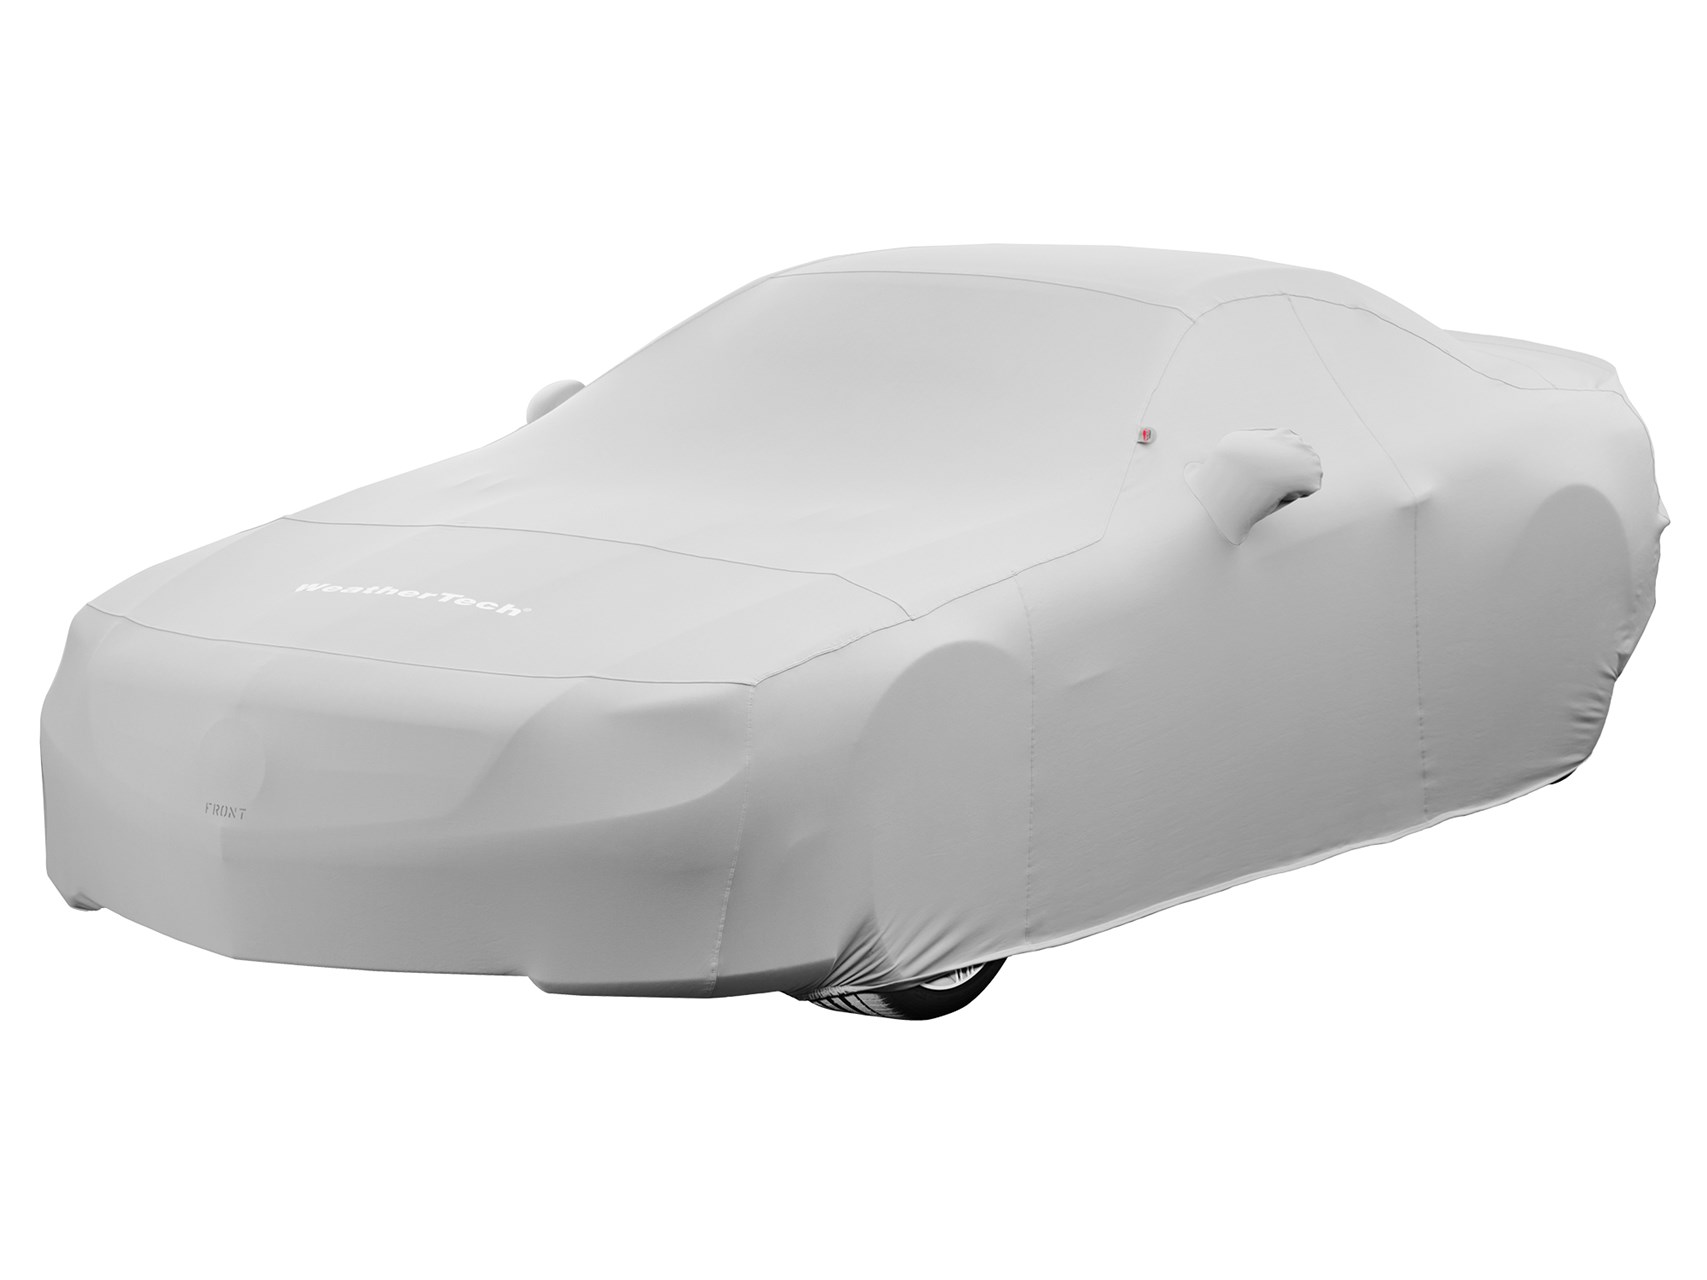 2016-2018 Camaro Form-Fit Indoor Car Cover, Coupe or Convertible Models